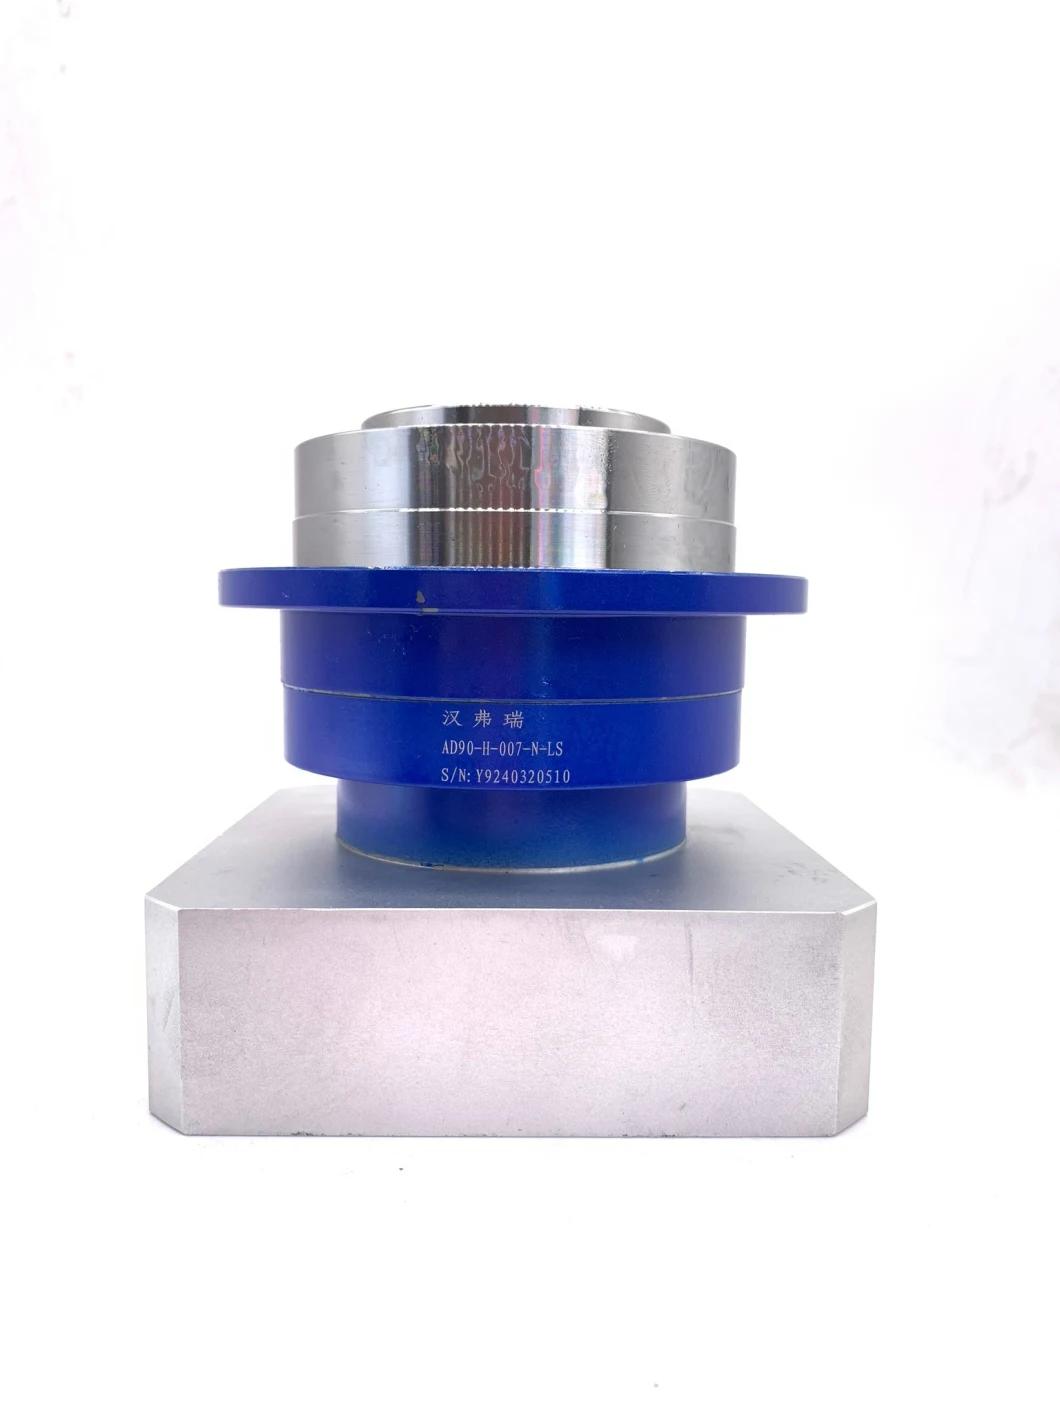 Hunphery Gear Box for Laser Cutter Ad90-H-007-N-Ls (AD-H90-L1-22)